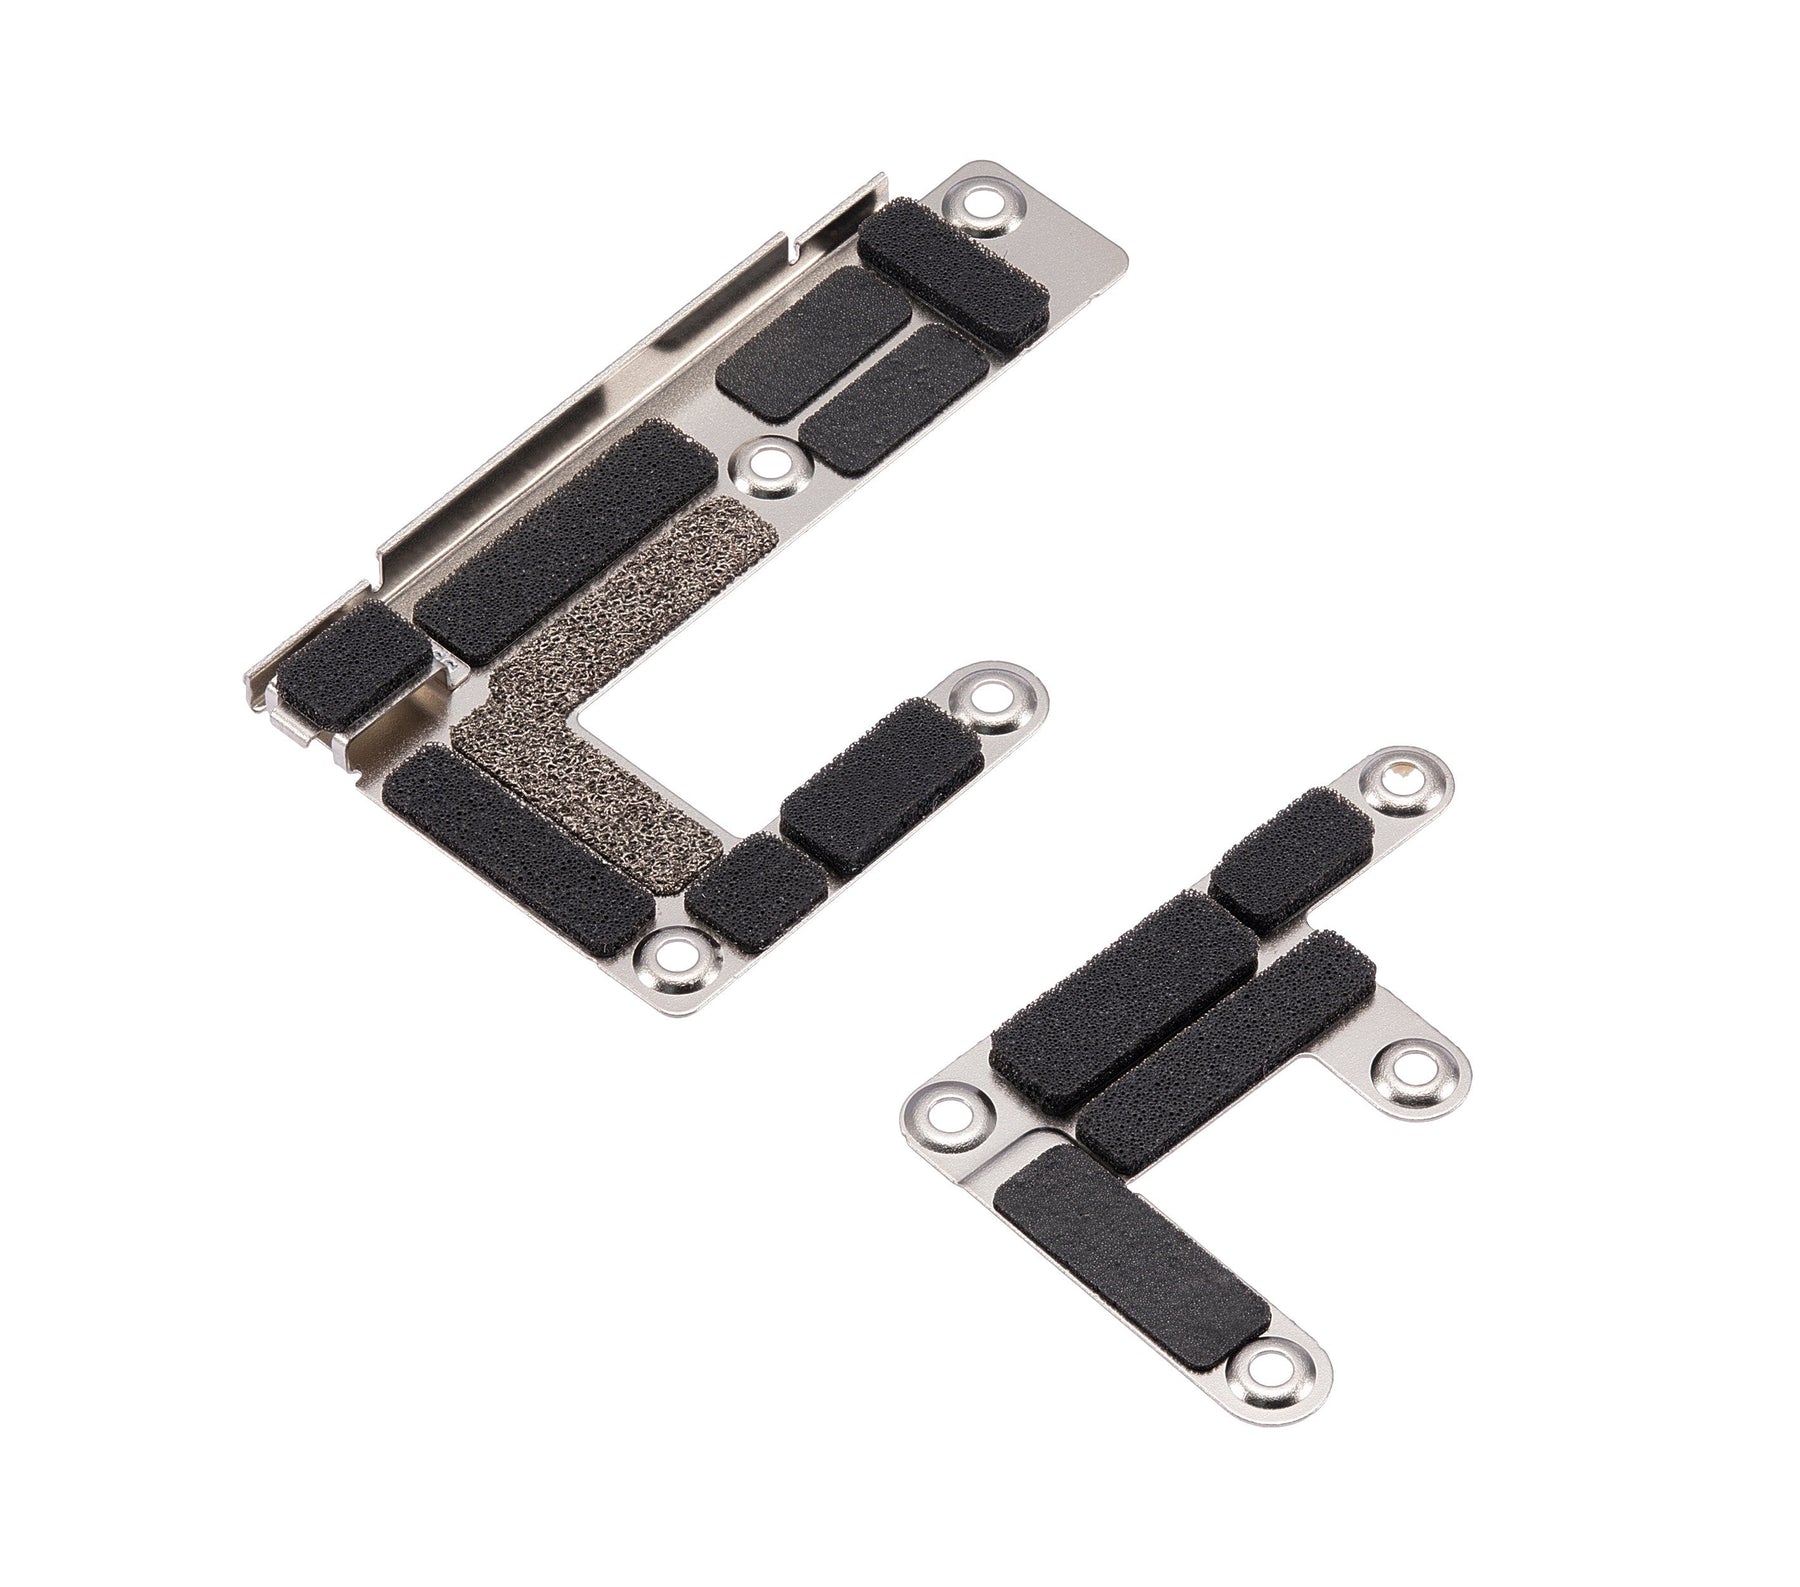 SMALL METAL BRACKET (ON MOTHERBOARD) COMPATIBLE WITH IPHONE 12 MINII